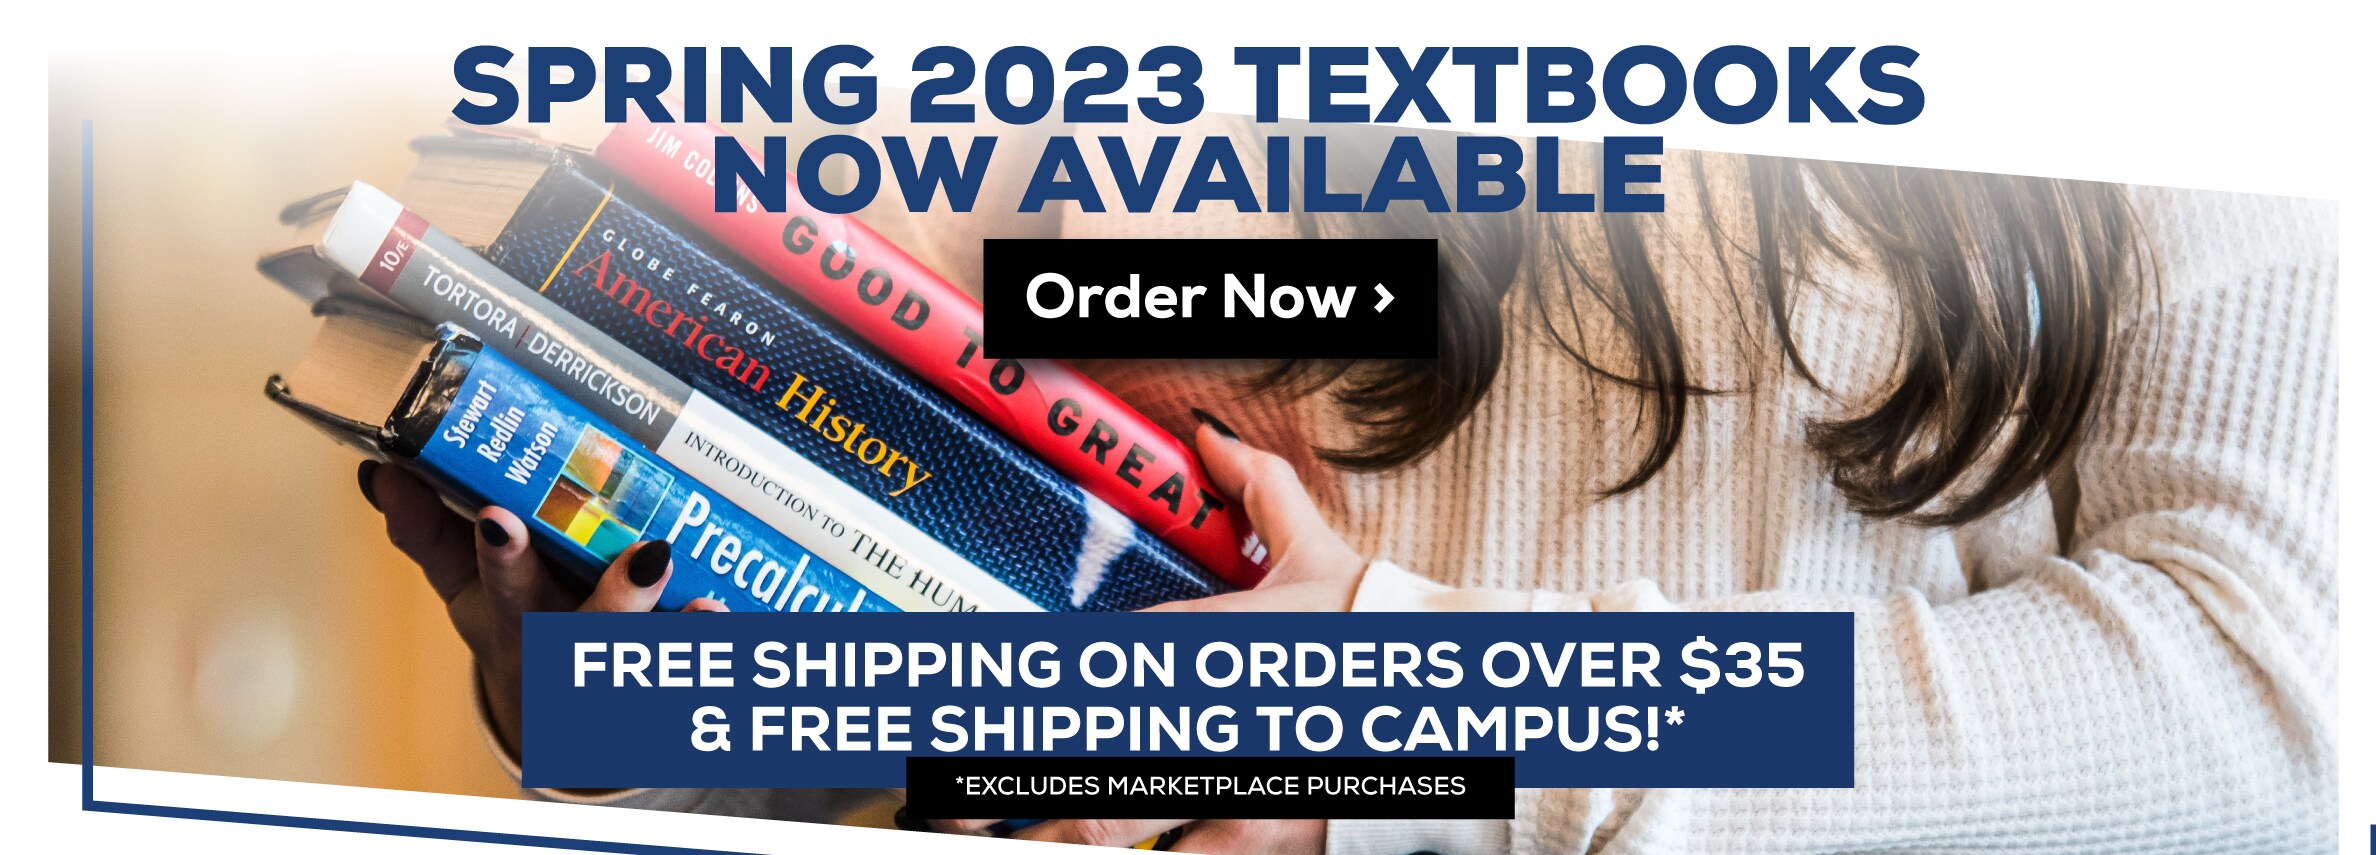 Spring 2023 Textbooks Now Available. Free shipping on all orders over $35 and free shipping to campus! Excludes marketplace purchases. Order Now.